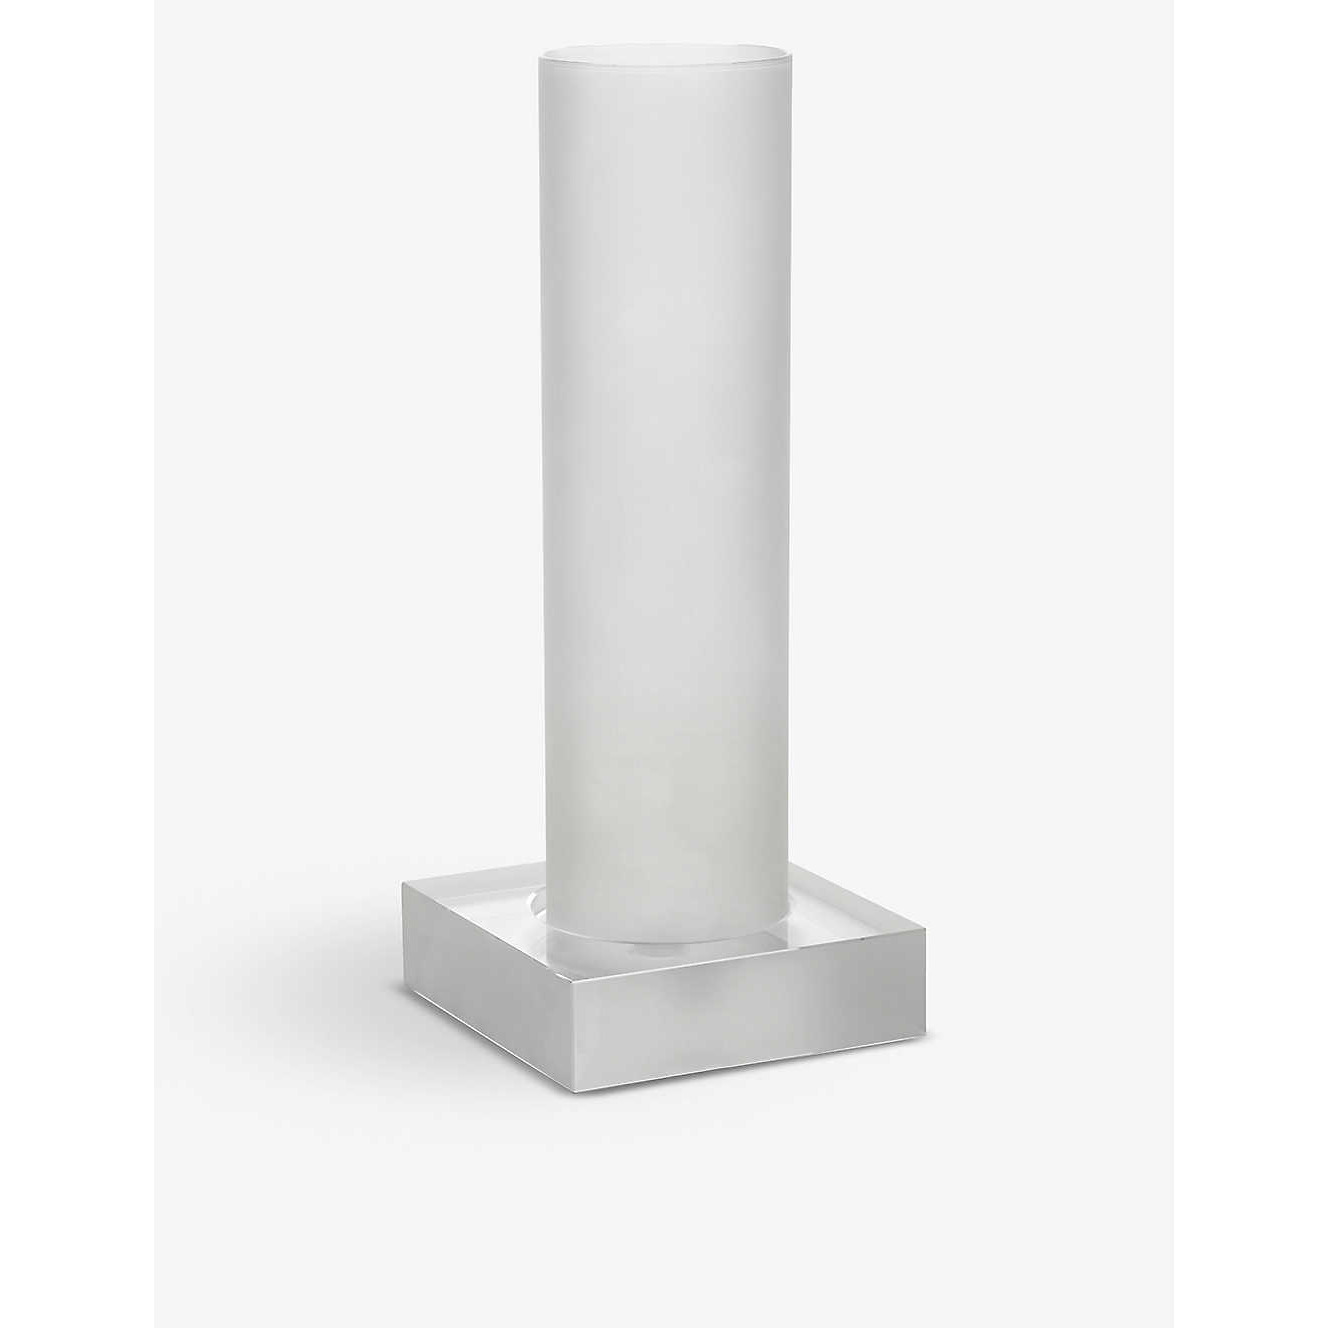 Ann Demeulemeester Winter crystal-glass candle holder 41.5cm - image 1